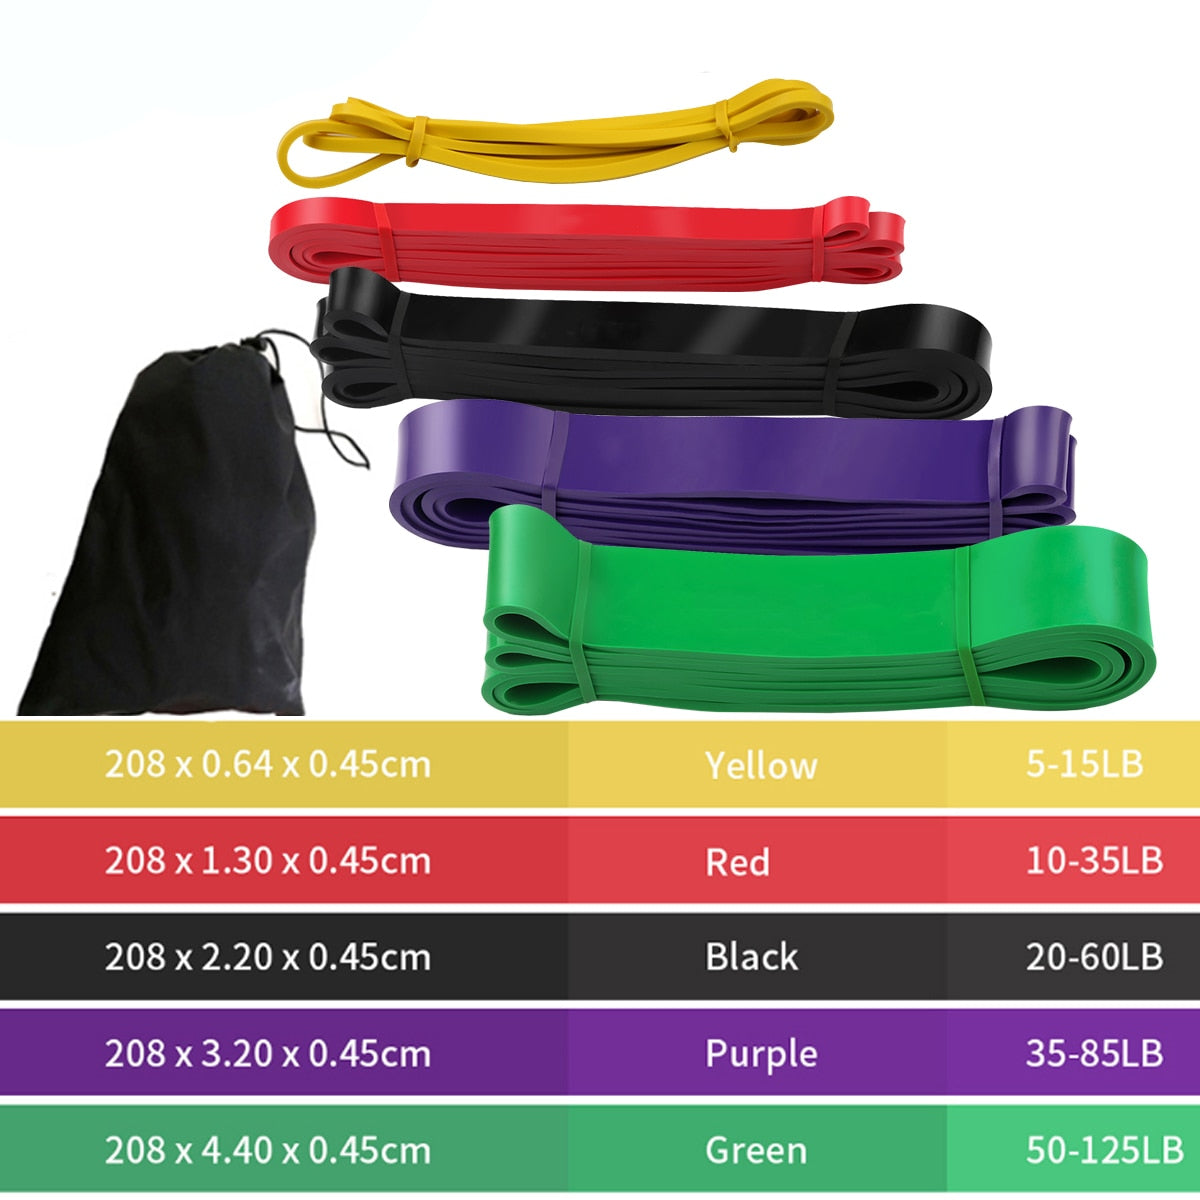 41 Resistance Bands 208cm Fitness Rubber Pull-Up Crossfit Power Expander - inneroasisco